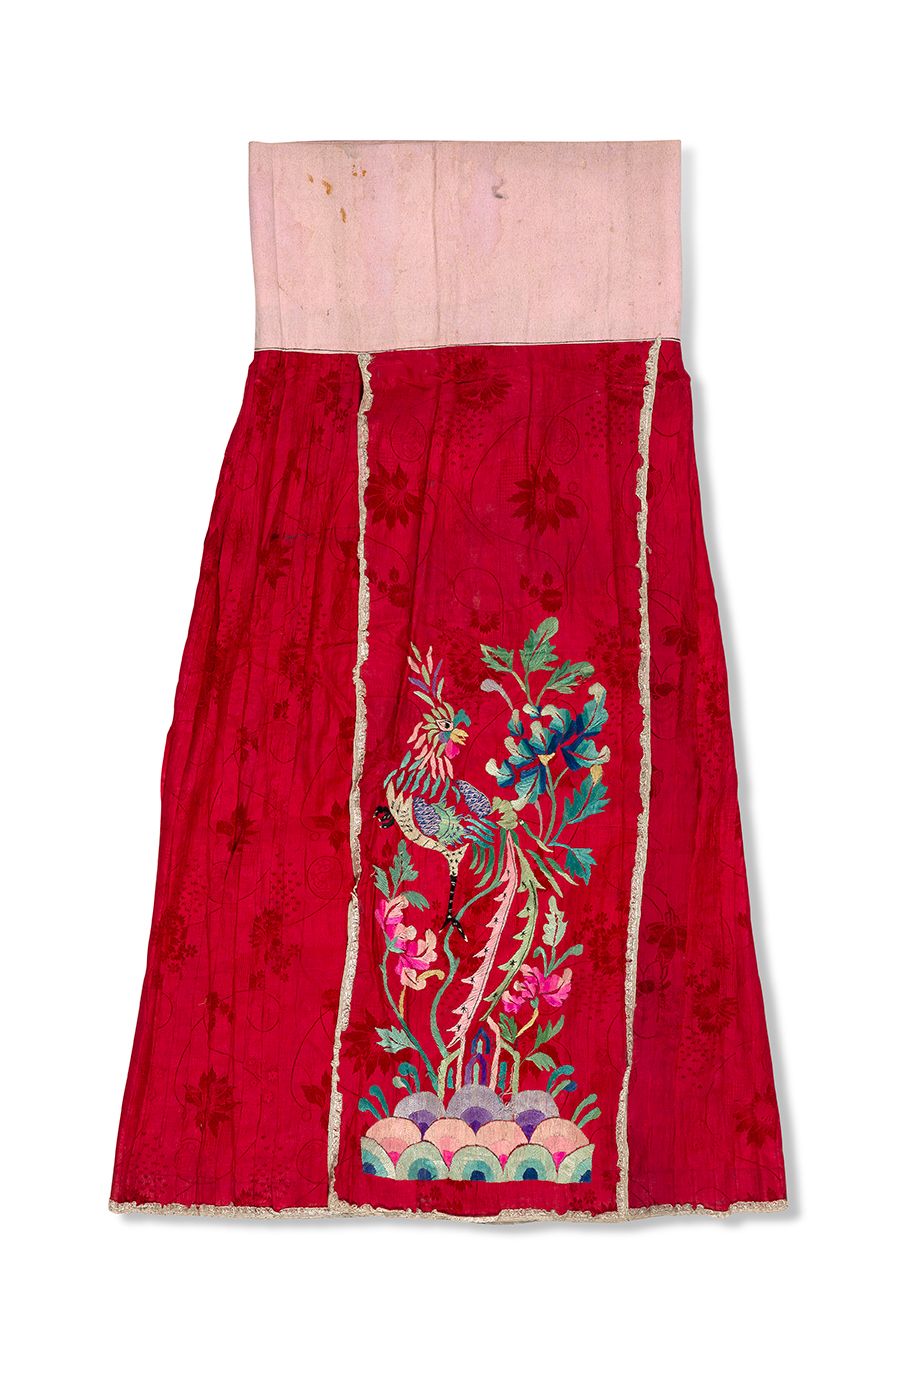 CHINE VERS 1900 Skirt (mang qun)
In red damask with a background decorated with &hellip;